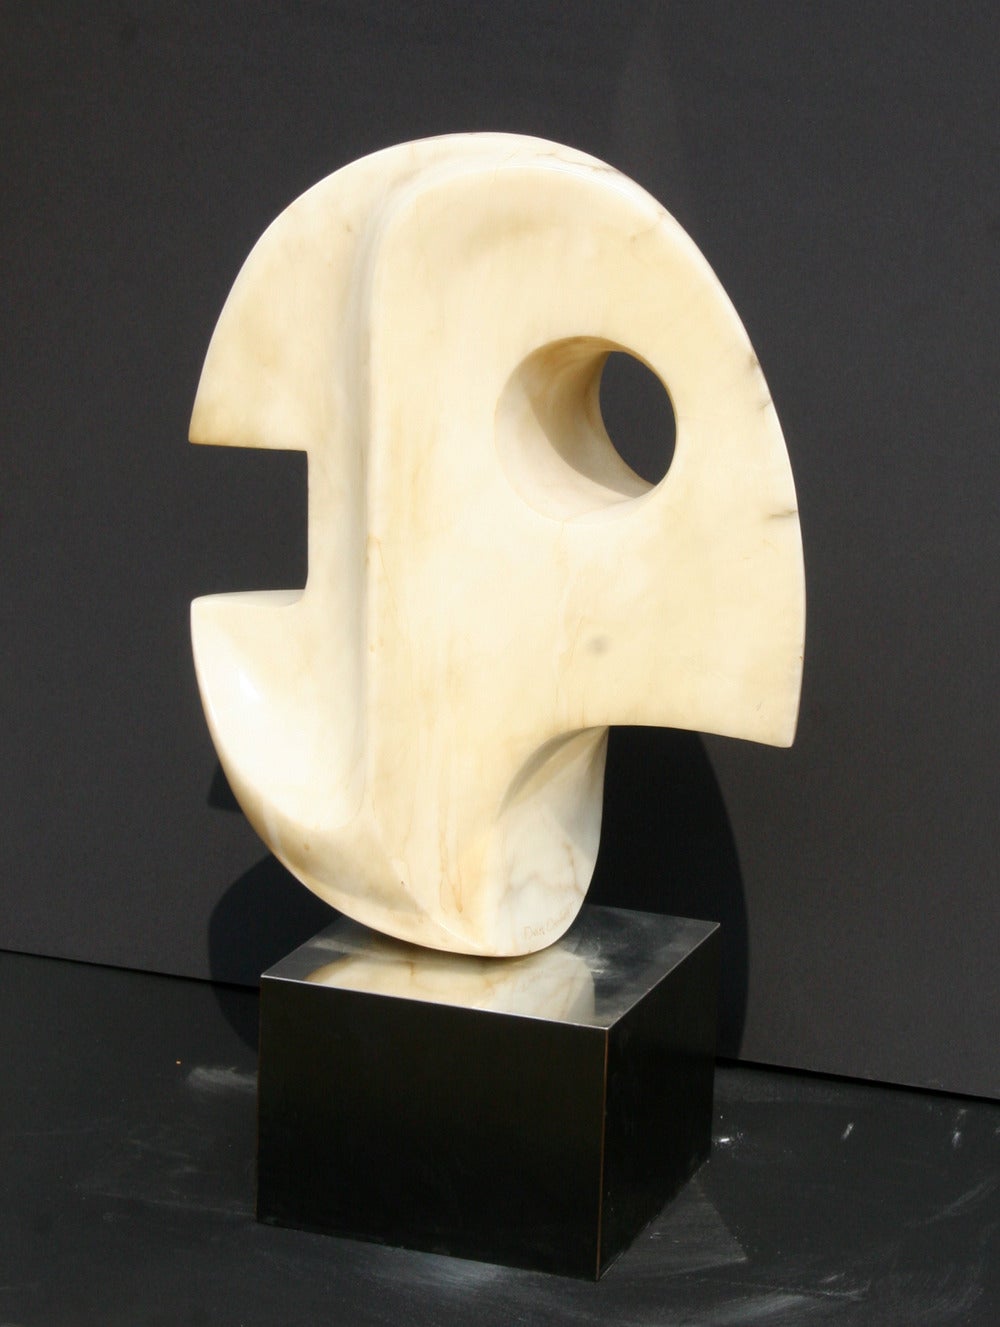 Dan Content Modern Abstract Sculpture Marble Sculpture For Sale At